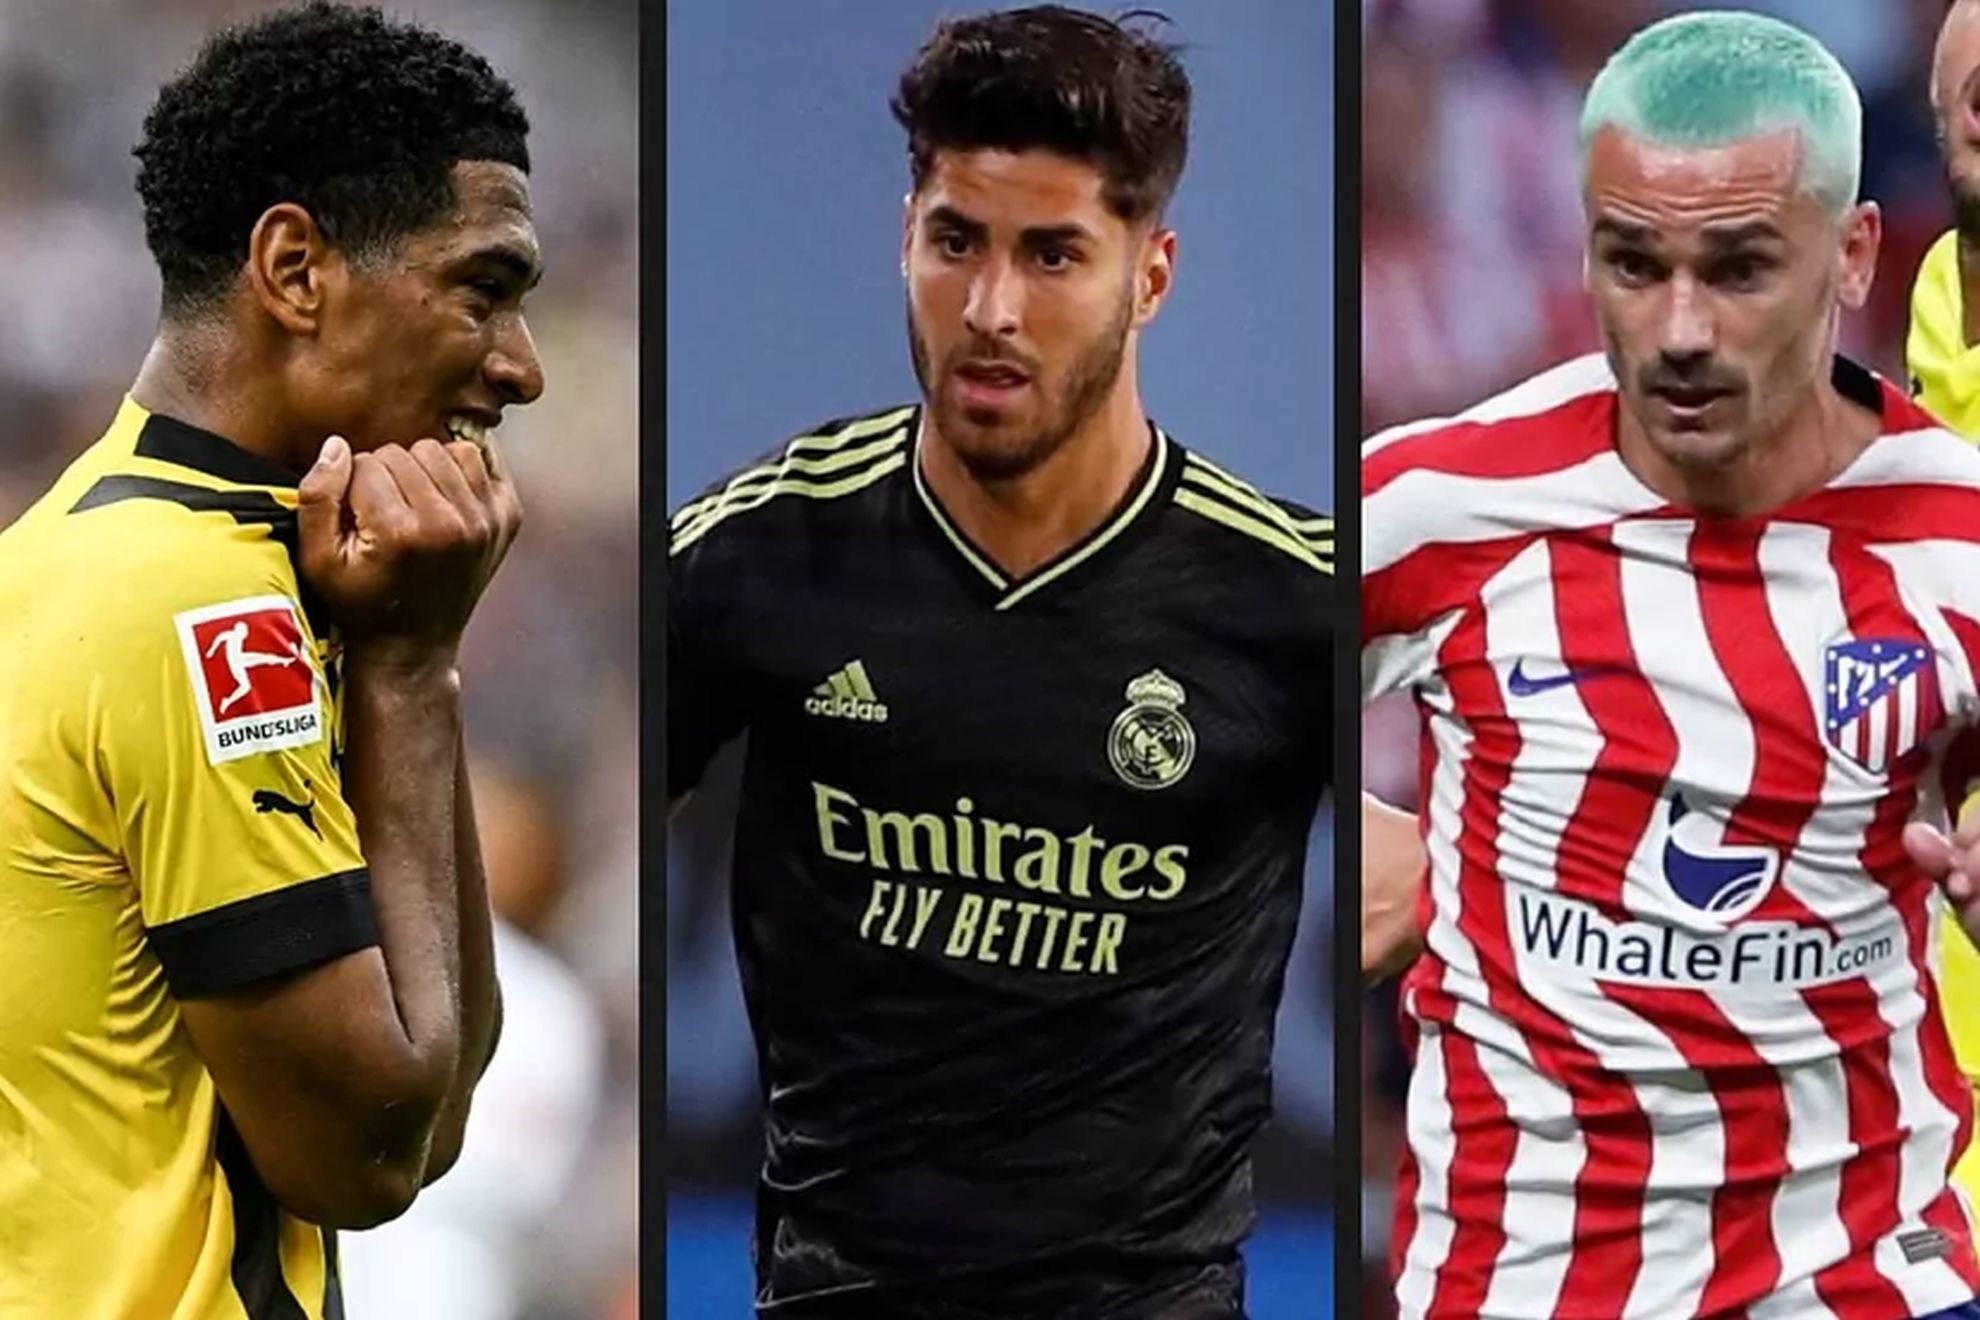 Transfer News LIVE, August 29: Asensio and Griezmann could join the same team, Real Madrid battle with Juventus...